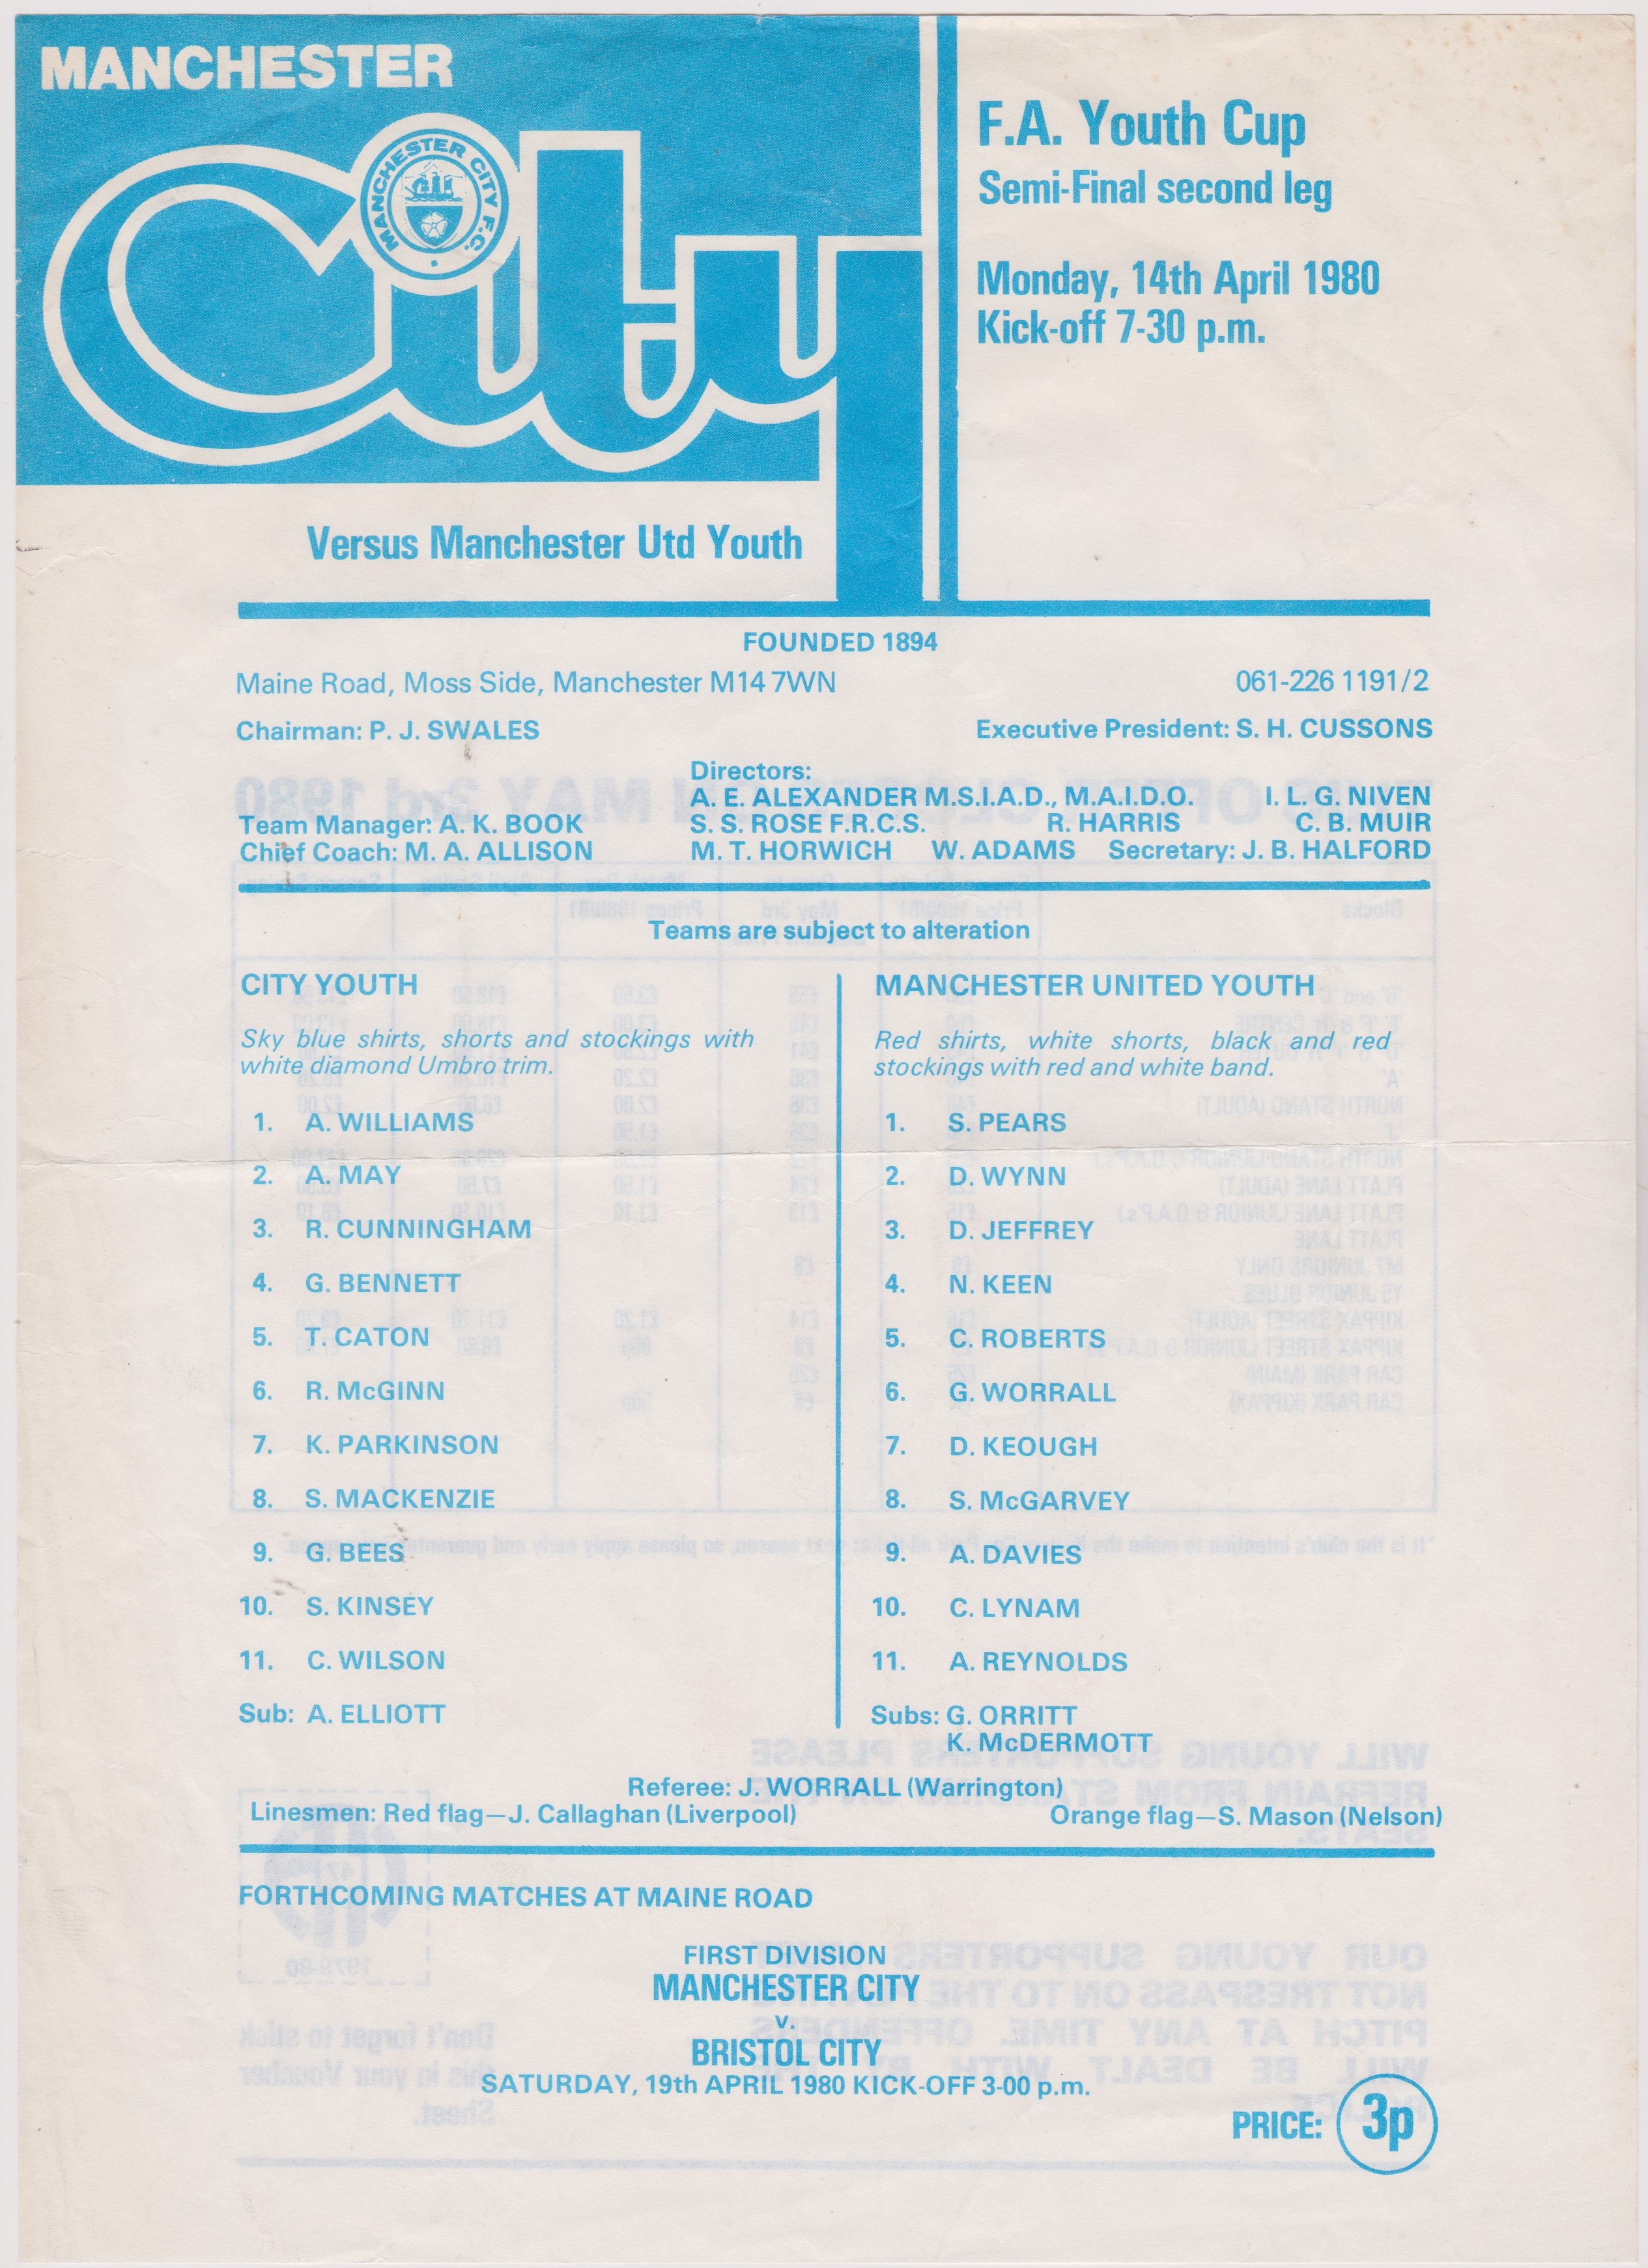 Single sheet programme Manchester City v Manchester United FA Youth Cup Semi Final 14th April